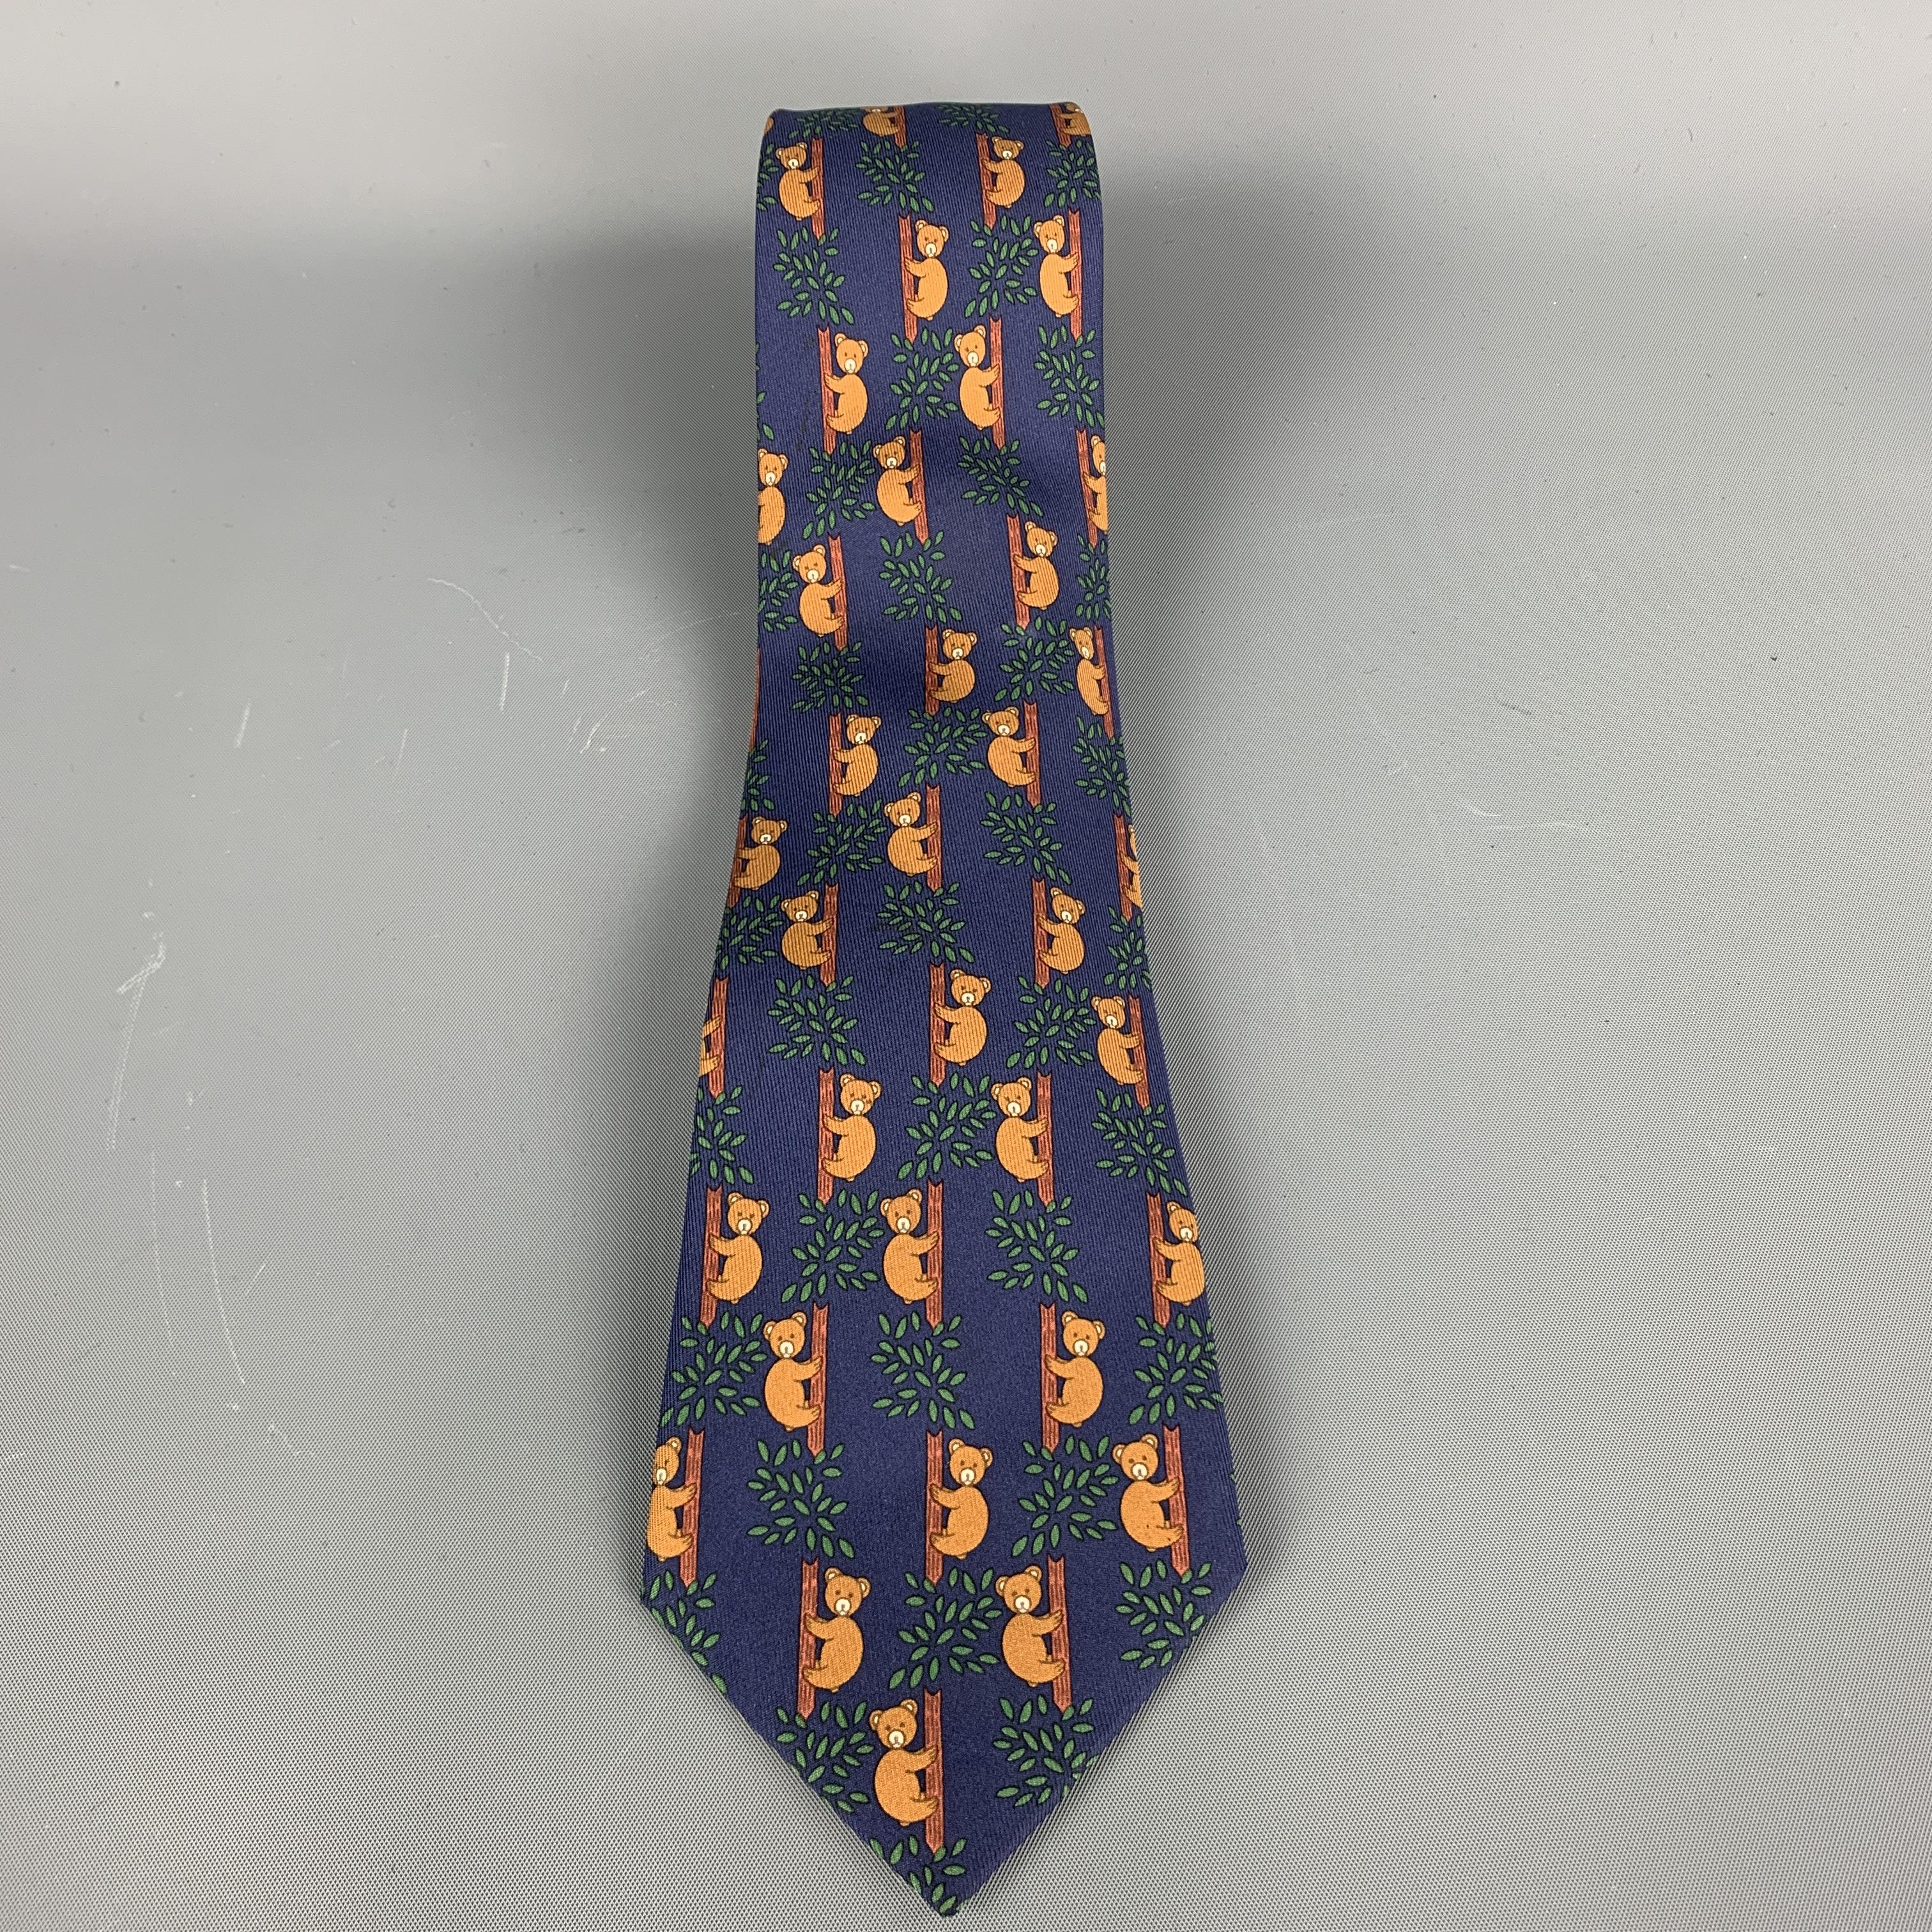 Vintage Hermes skinny necktie comes in navy and brown silk twill with all over 